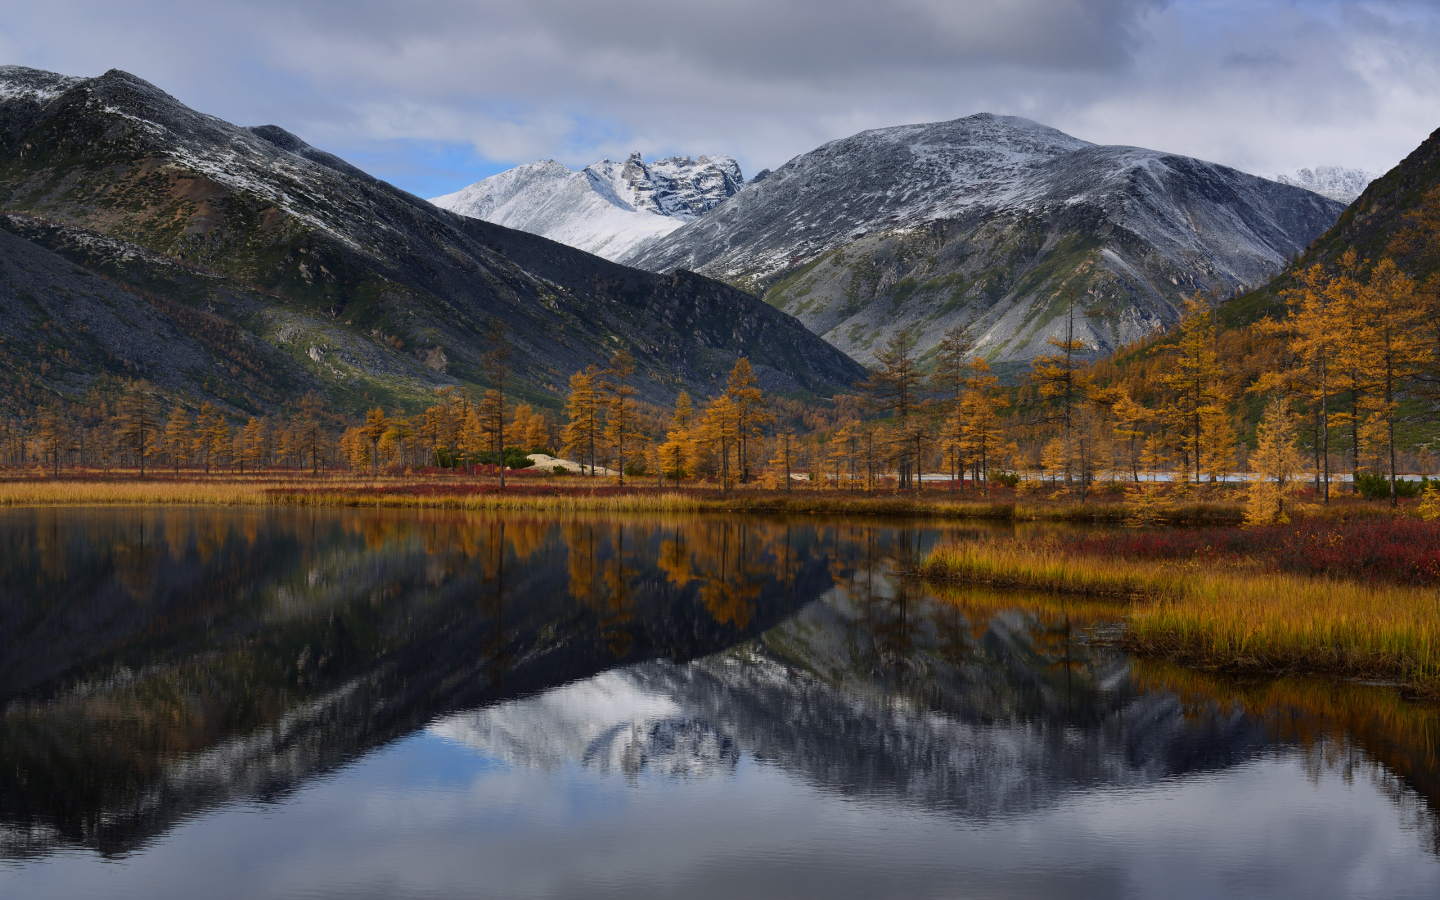 Mountains are reflected in the surface of the lake in autumn